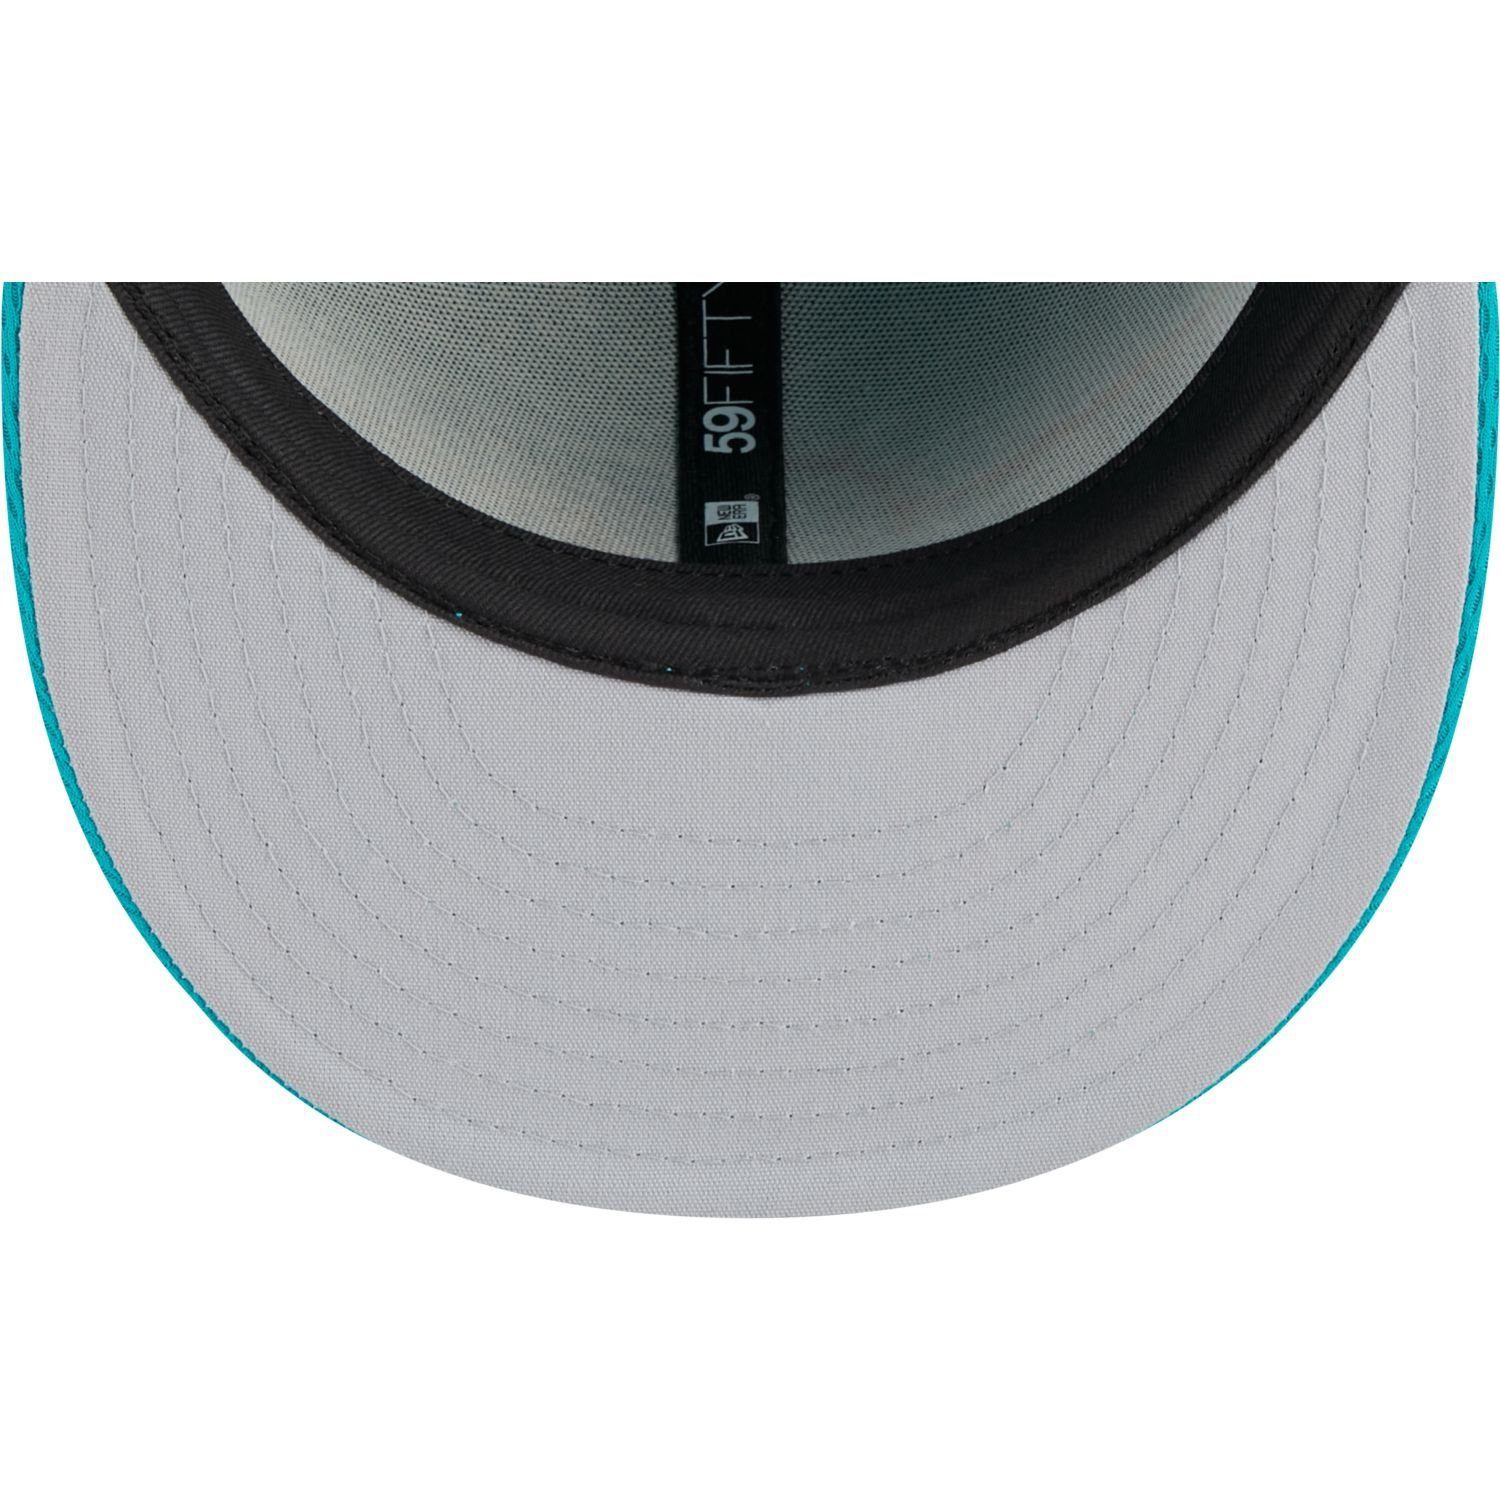 Miami 59Fifty NFL Fitted Era TRAINING Cap New Dolphins